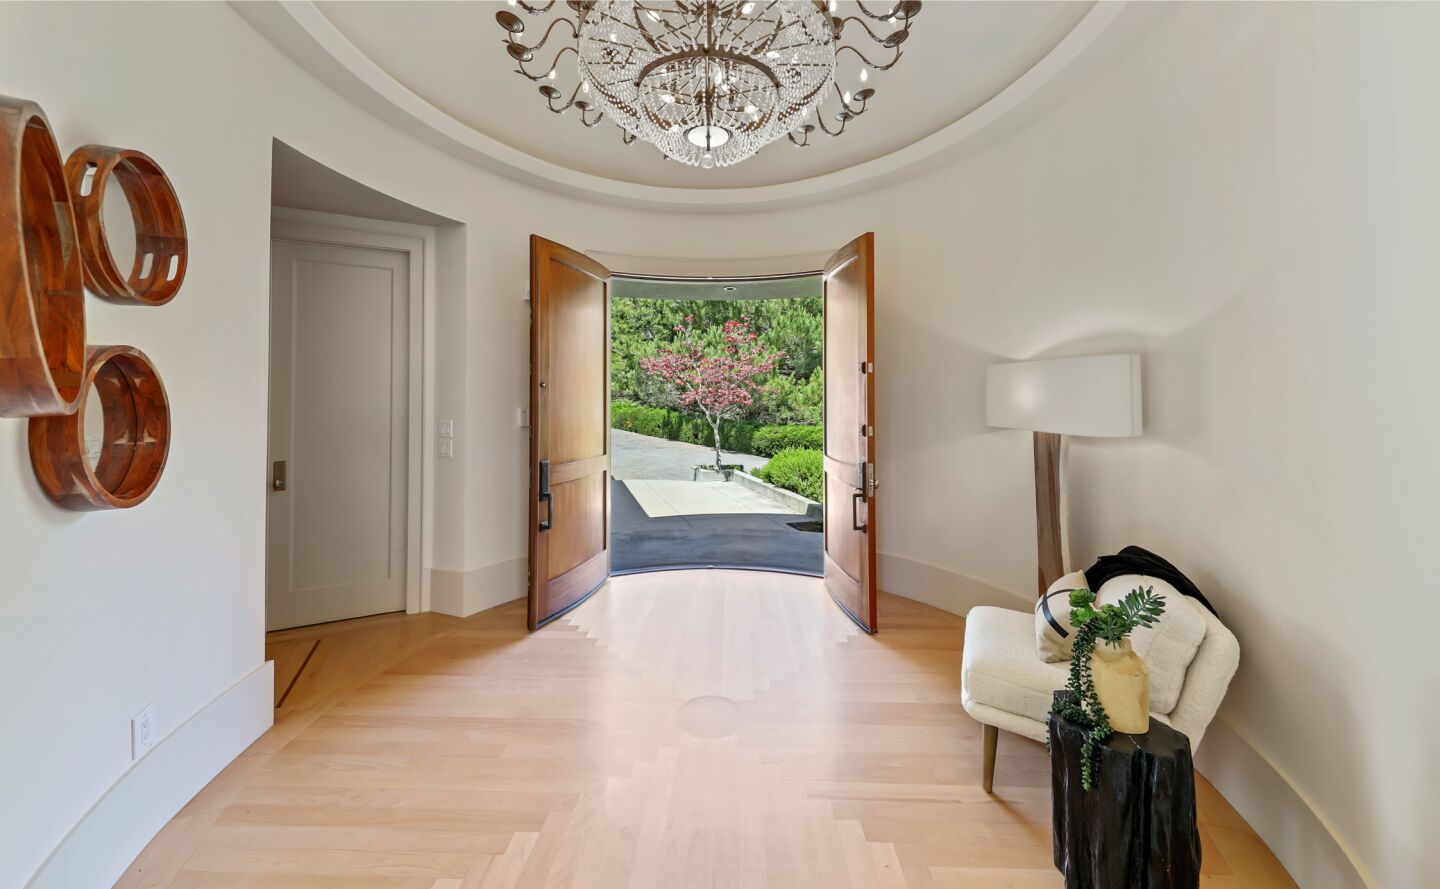 Double wooden doors are open to the front porch in a room with a chandelier and wood floor.